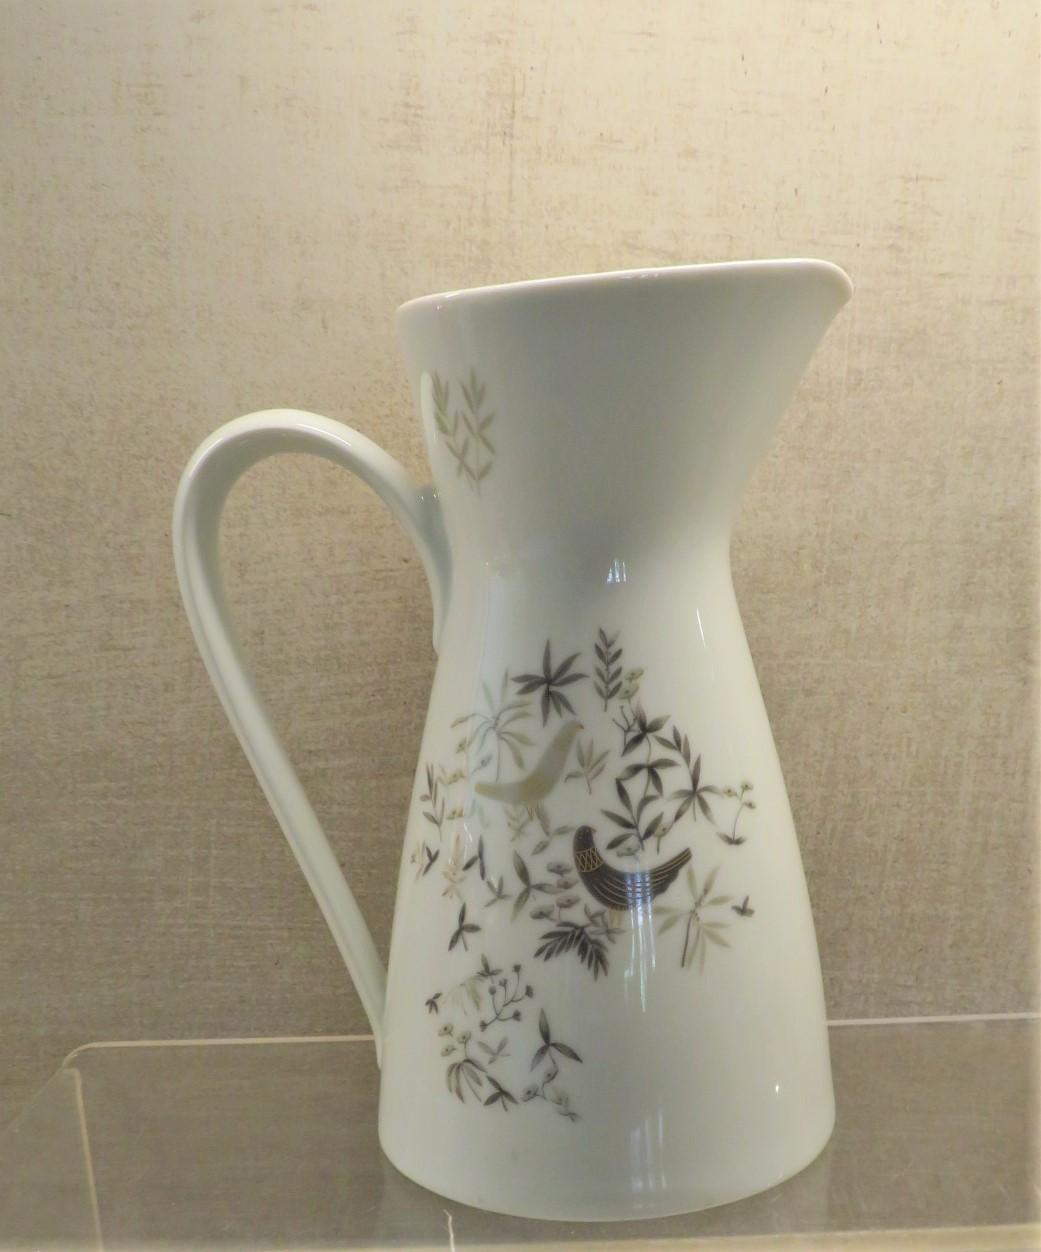 A rare find, a water pitcher in this exquisite pattern Birds on Trees by Raymond Loewy for Rosenthal, Germany. Birds on Trees was only produced from 1961- 1964. Elegant and modern depiction of birds resting on some stylized trees done in a palette